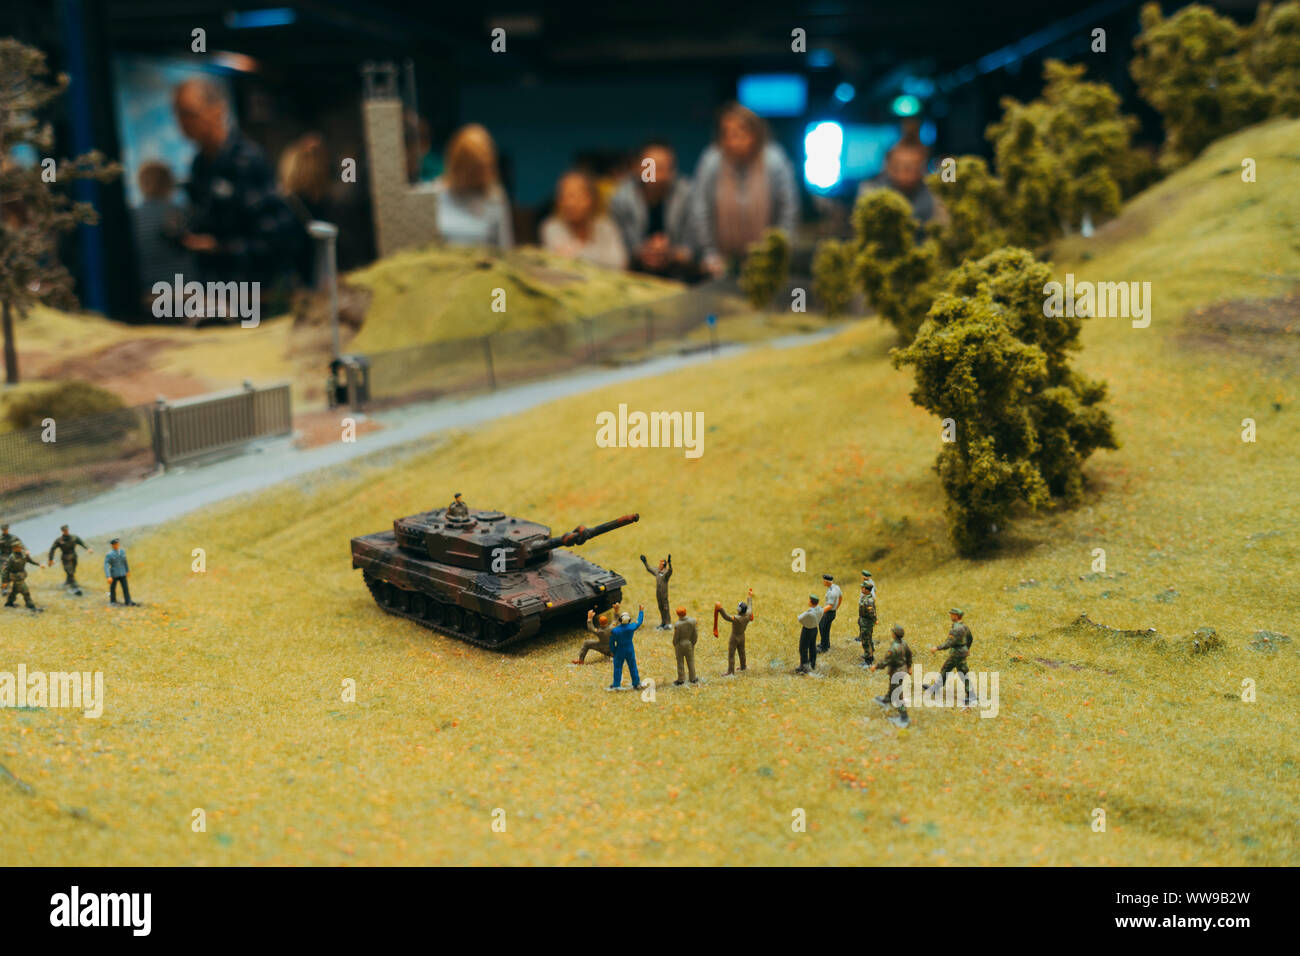 A miniature tank sits on a miniature battlefield whole model troops surrender and visitors look on at Miniatur Wunderland, Hamburg Stock Photo